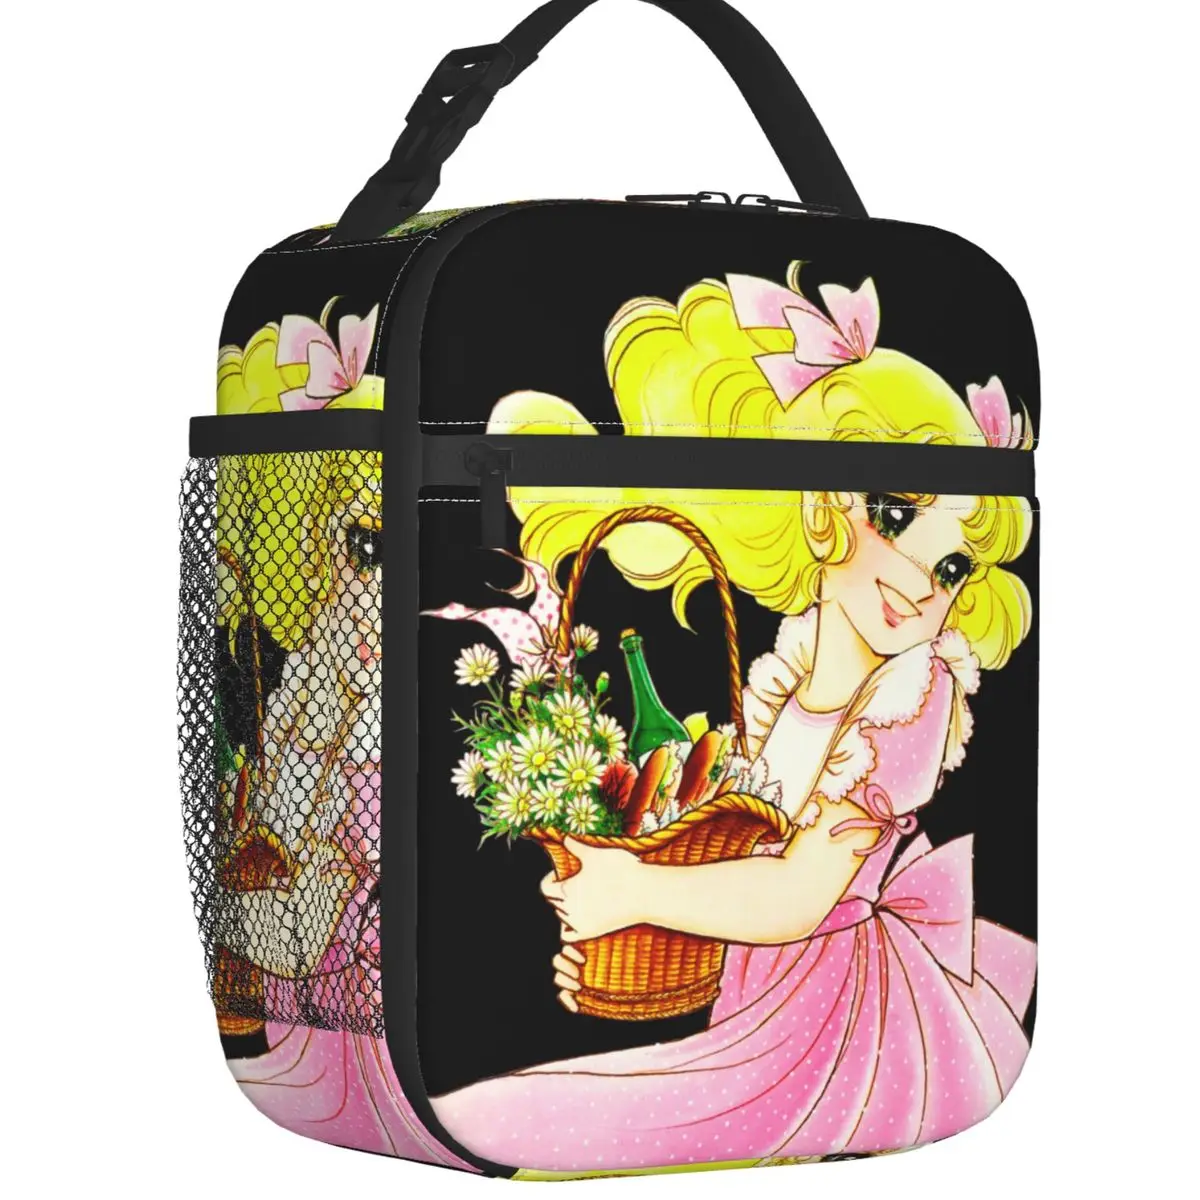 Candy Candy Thermal Insulated Lunch Bag Women Cartoon Anime Manga Portable Lunch Tote for Outdoor Picnic Storage Food Box